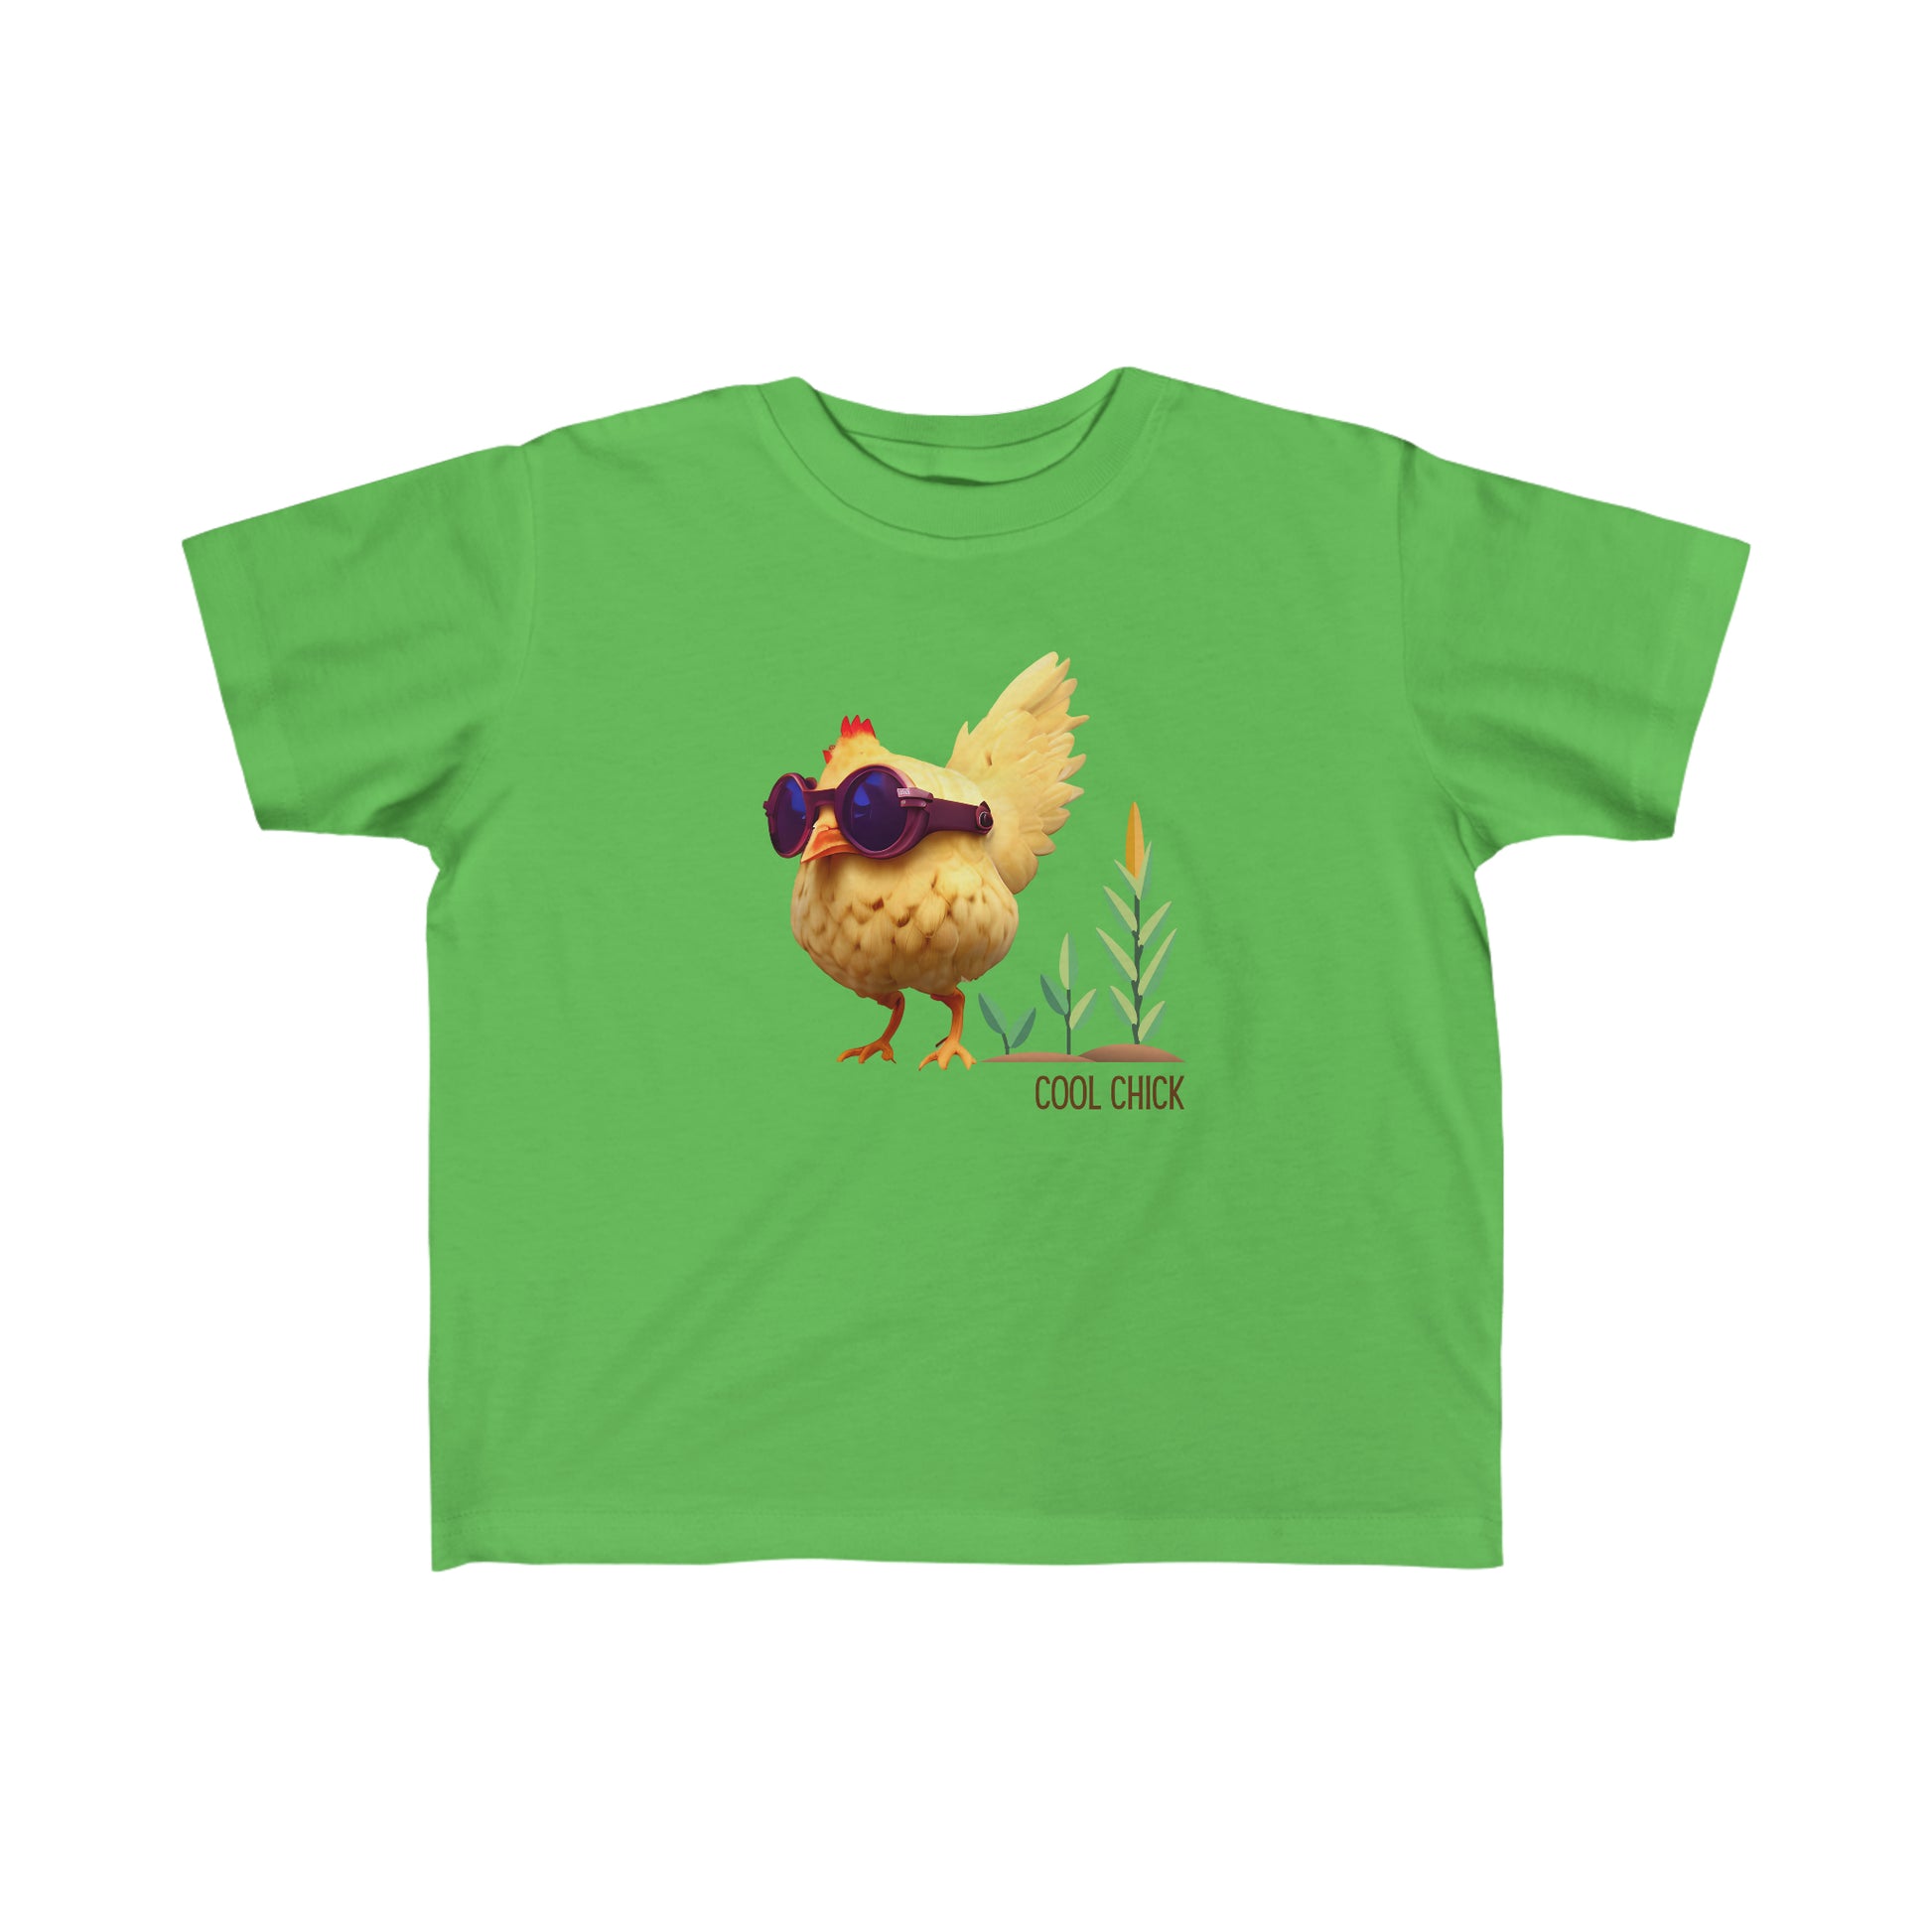 Cool Chick T-shirt in Apple Green